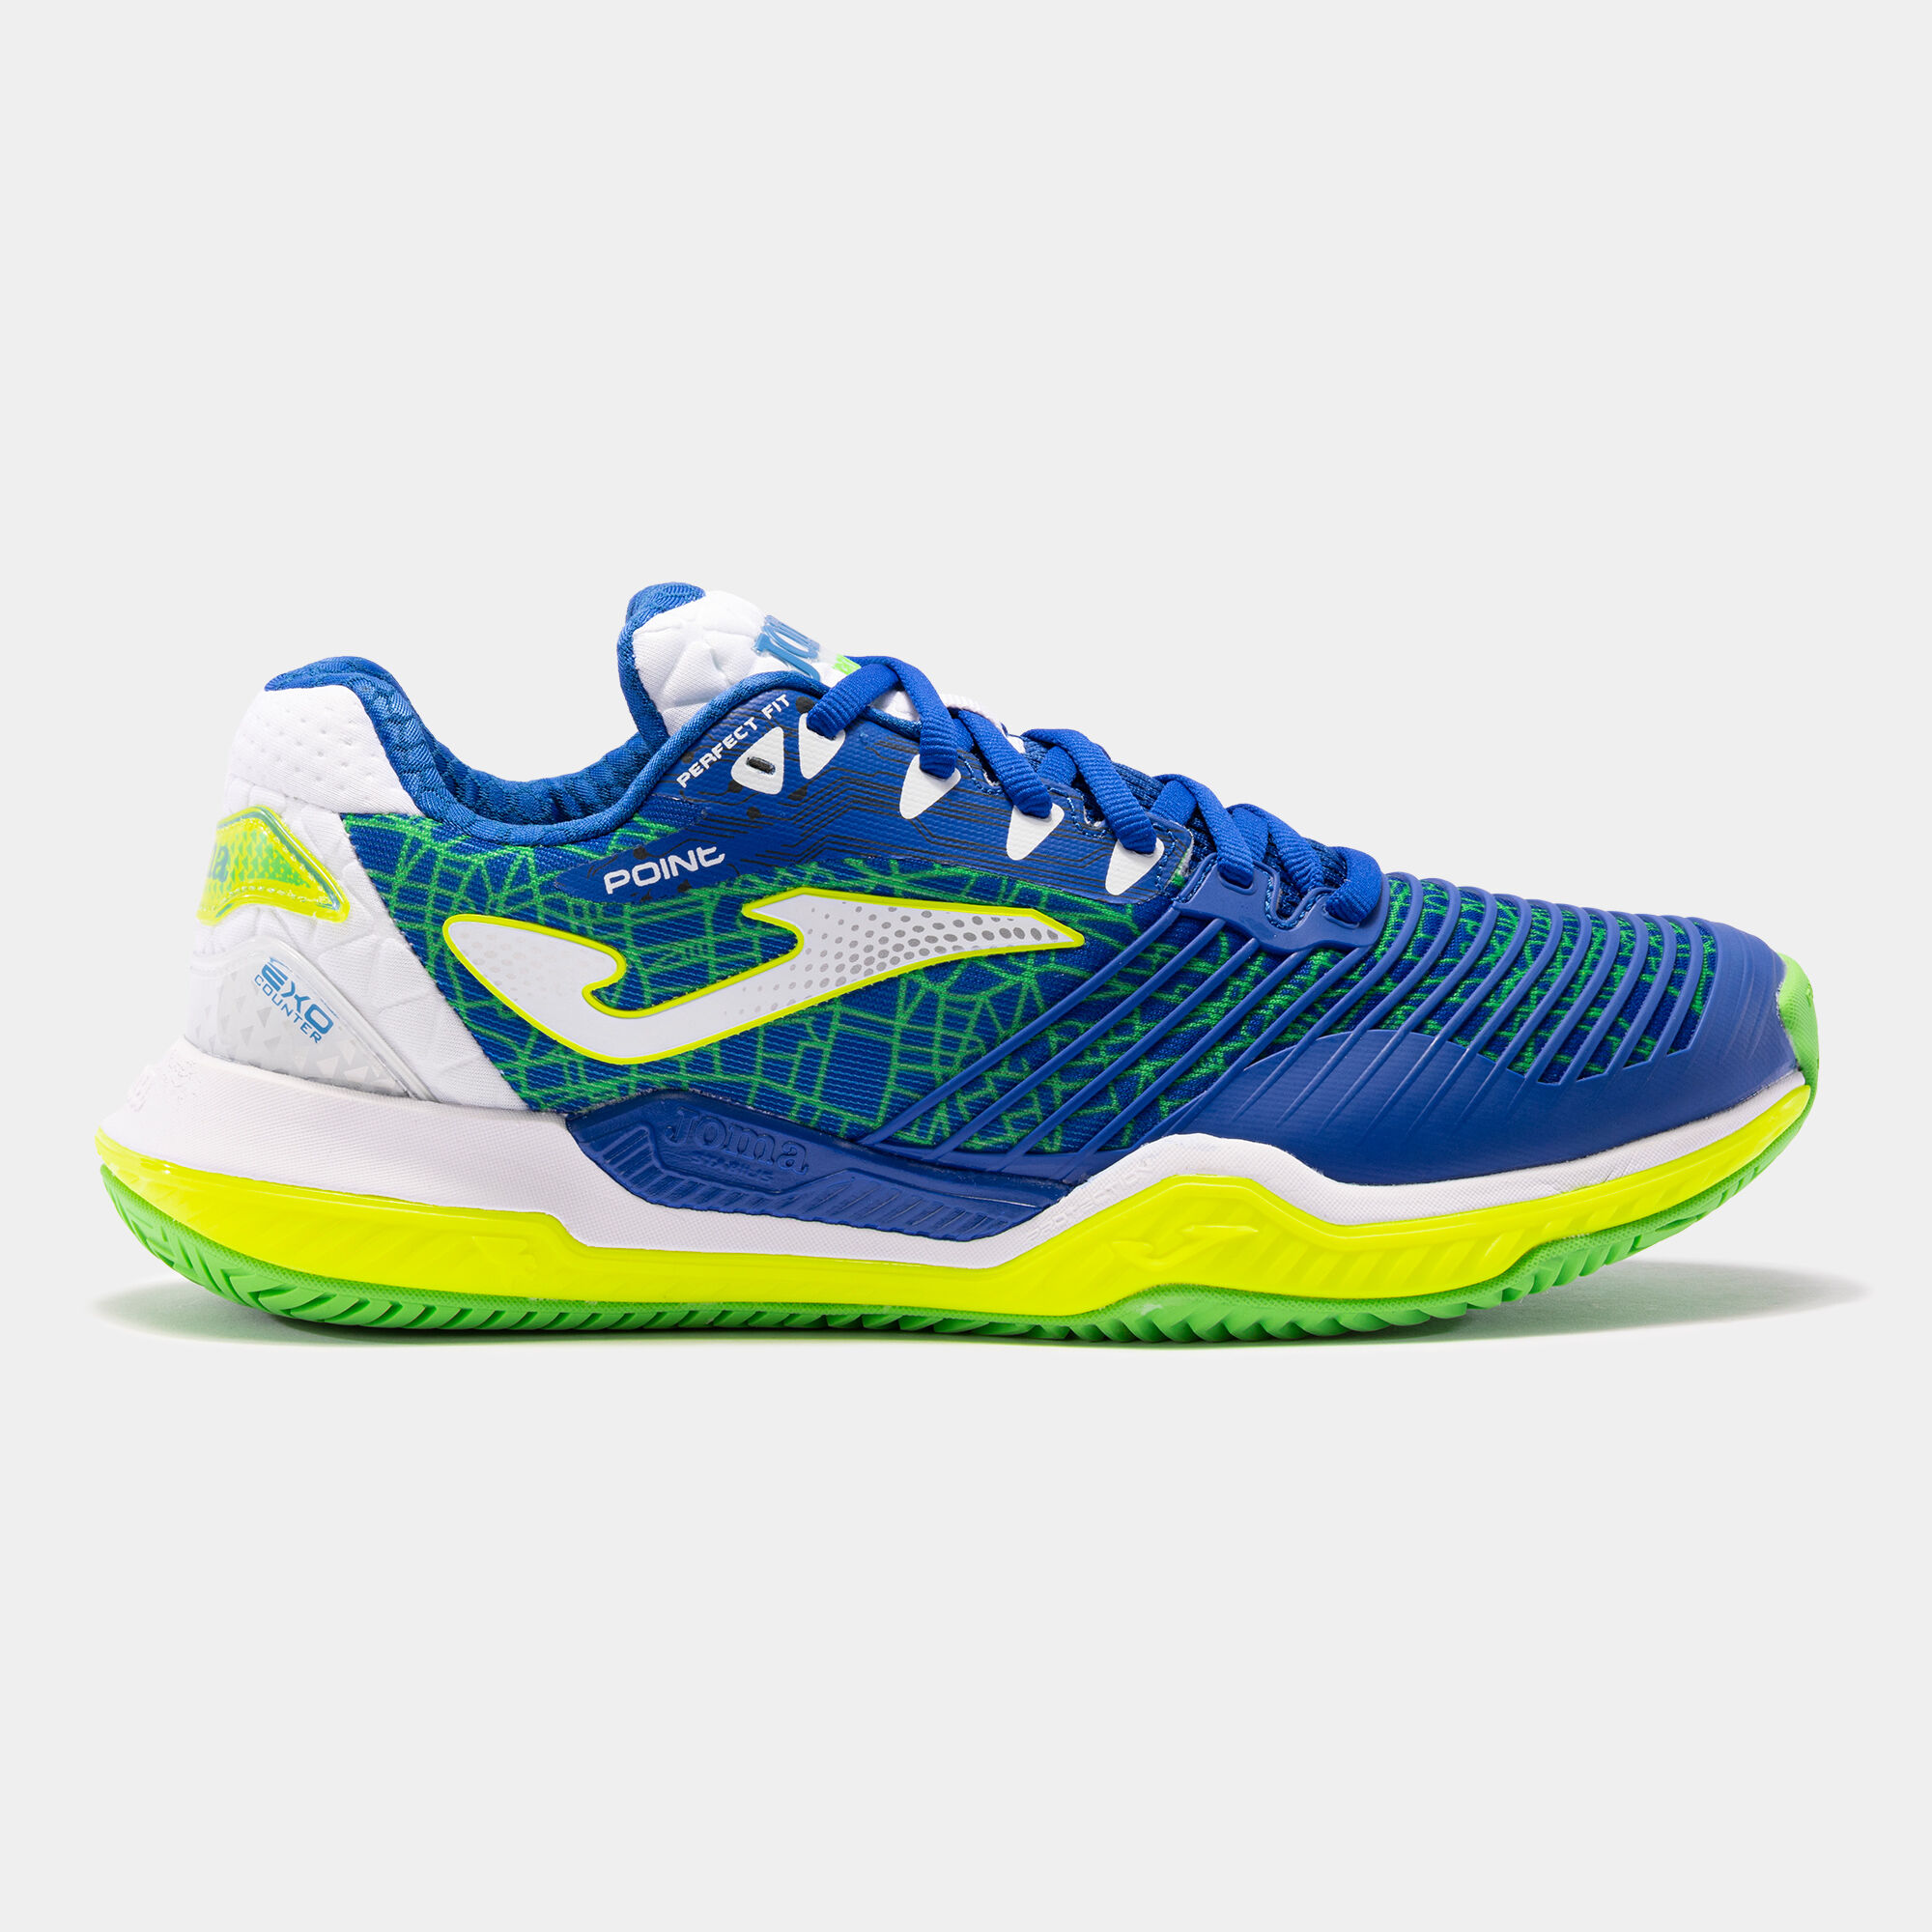 SHOES POINT 22 HARD COURT UNISEX ROYAL BLUE FLUORESCENT YELLOW